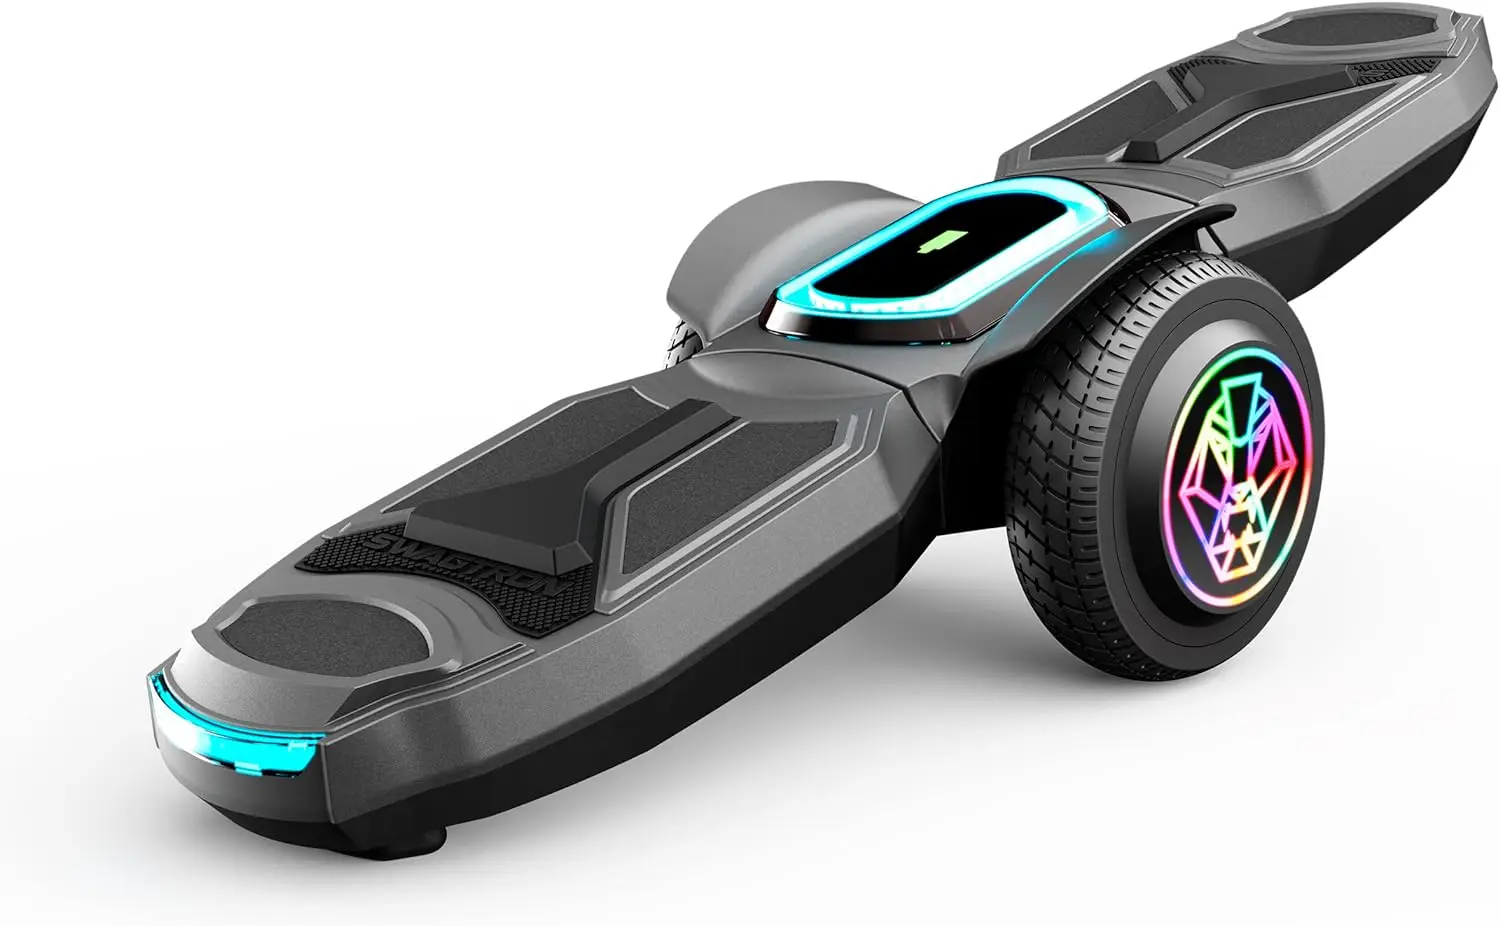 

Ride for Kids, Young by – The Hottest Gadget Toy of the Year! One-of-a-Kind Design